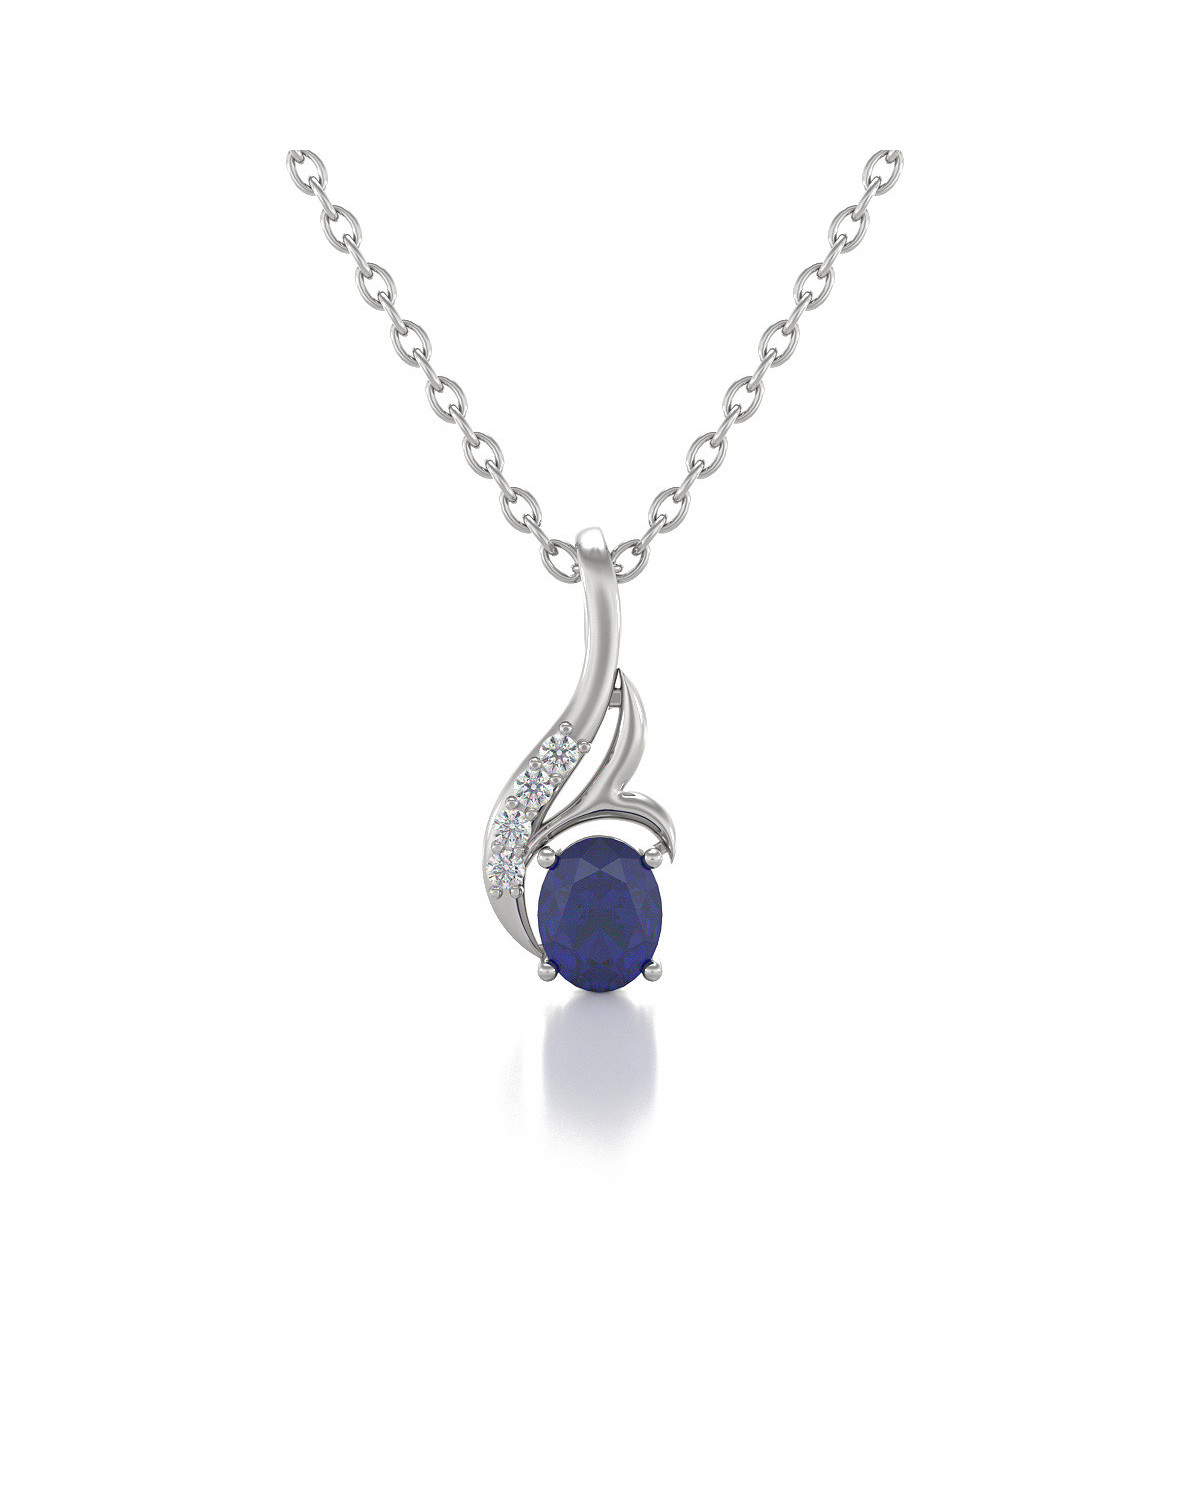 14K Gold Sapphire Diamonds Necklace Pendant Gold Chain included